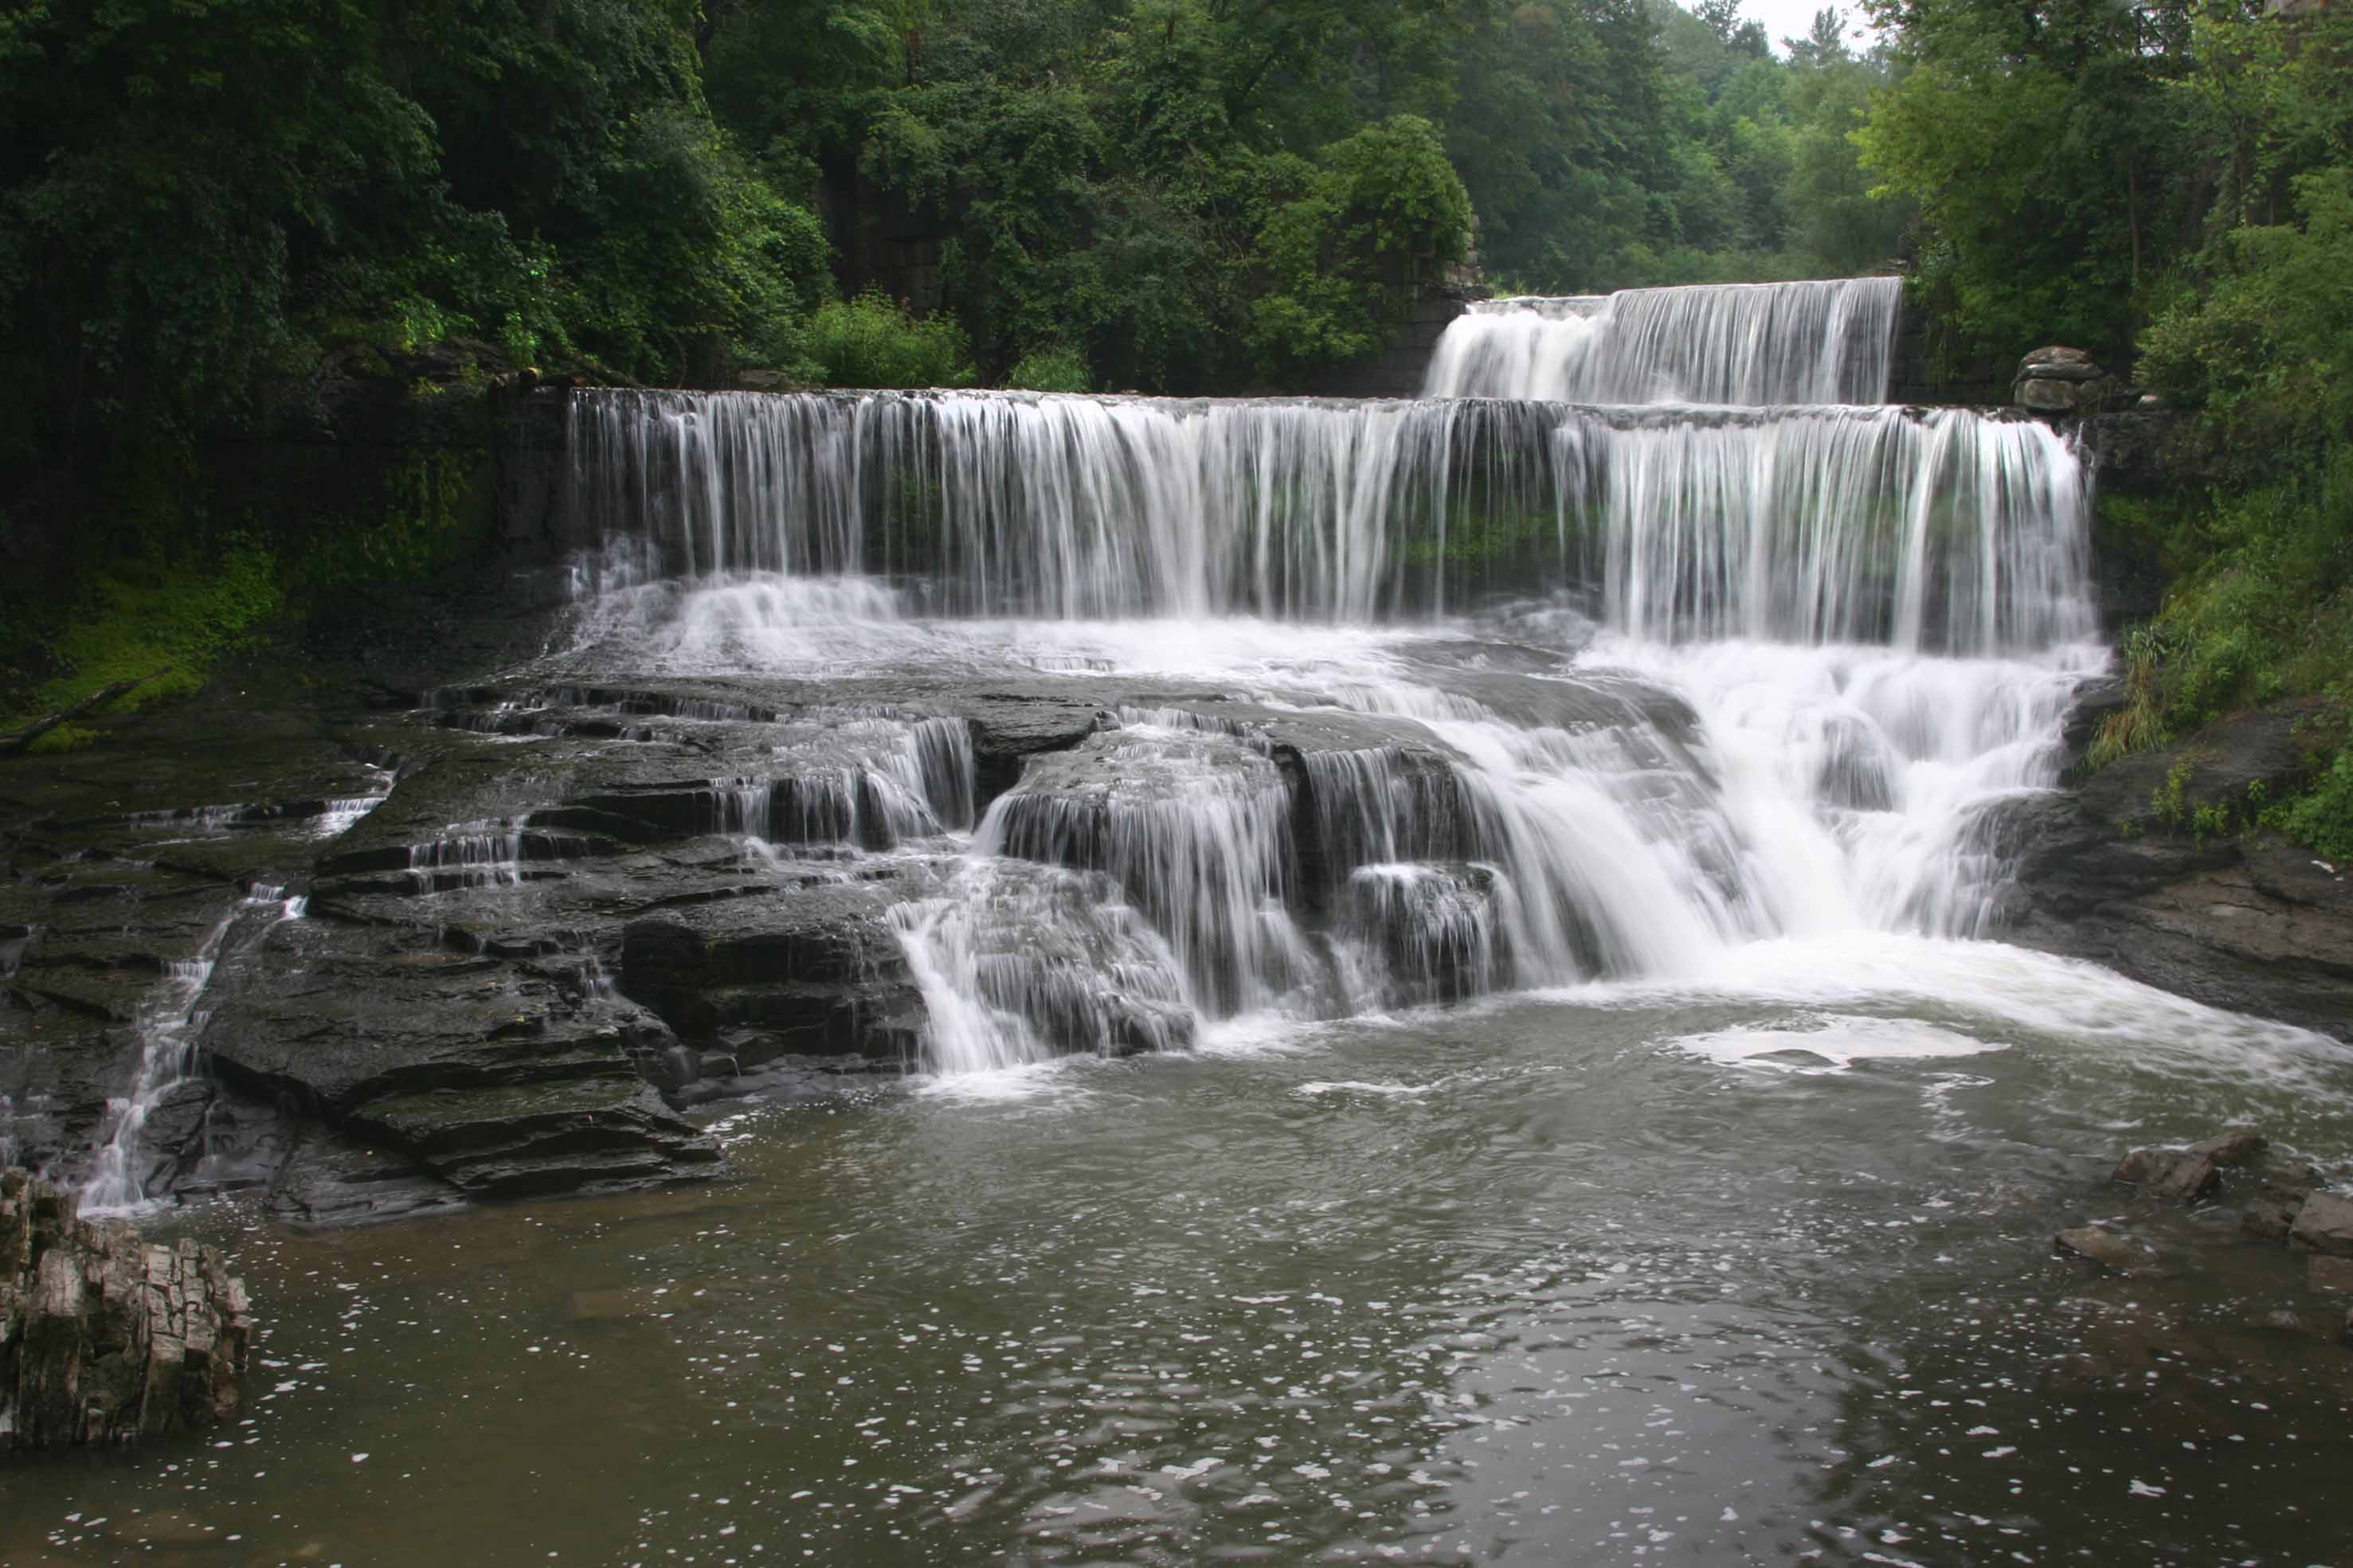 One of  the Keuka outlet falls